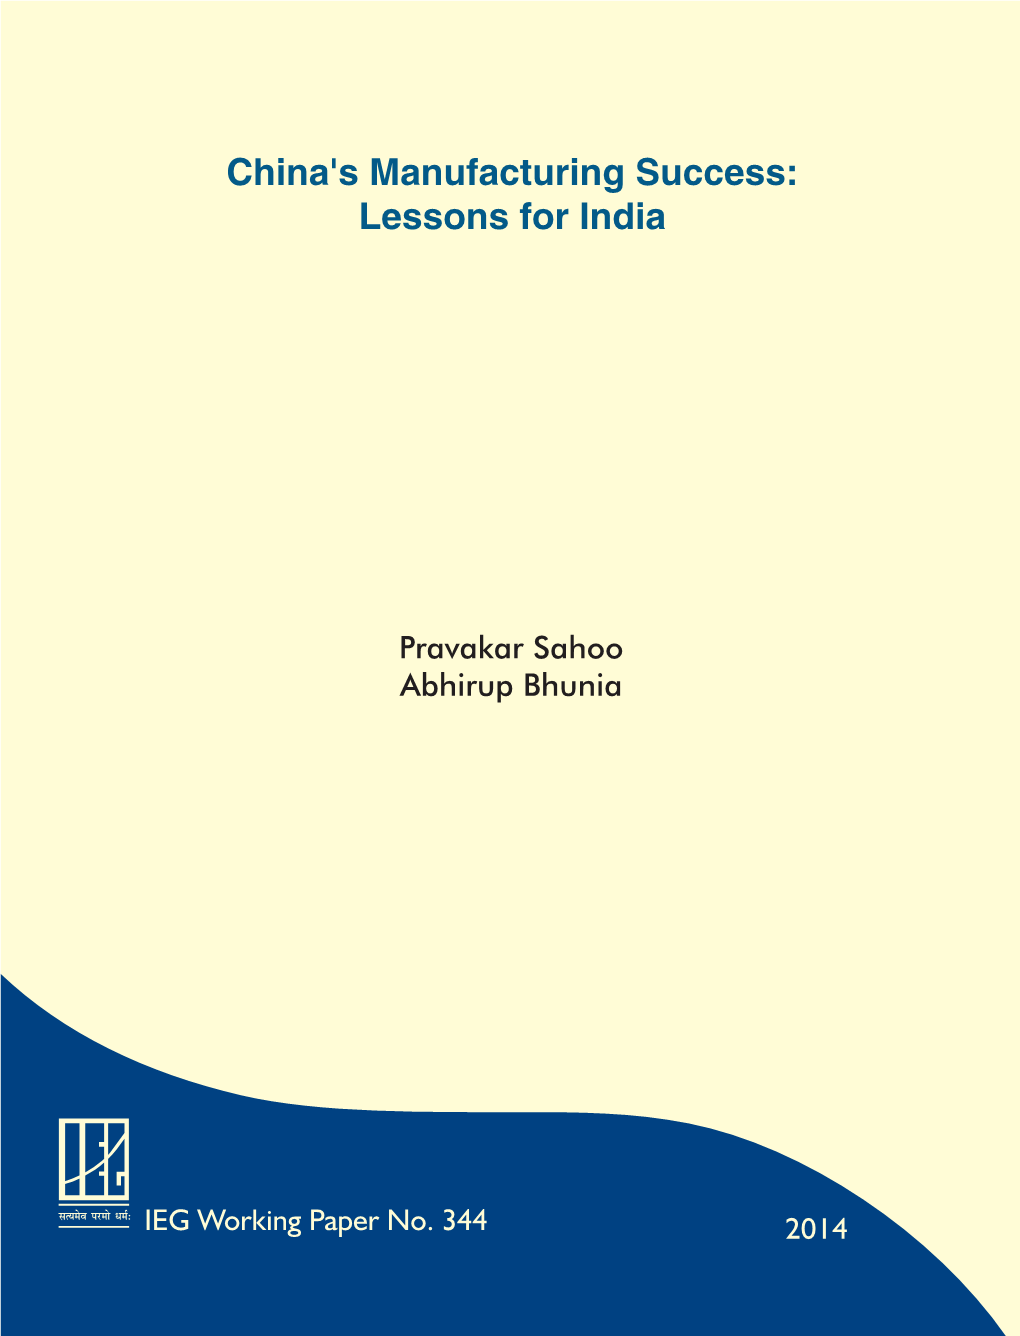 China's Manufacturing Success: Lessons for India